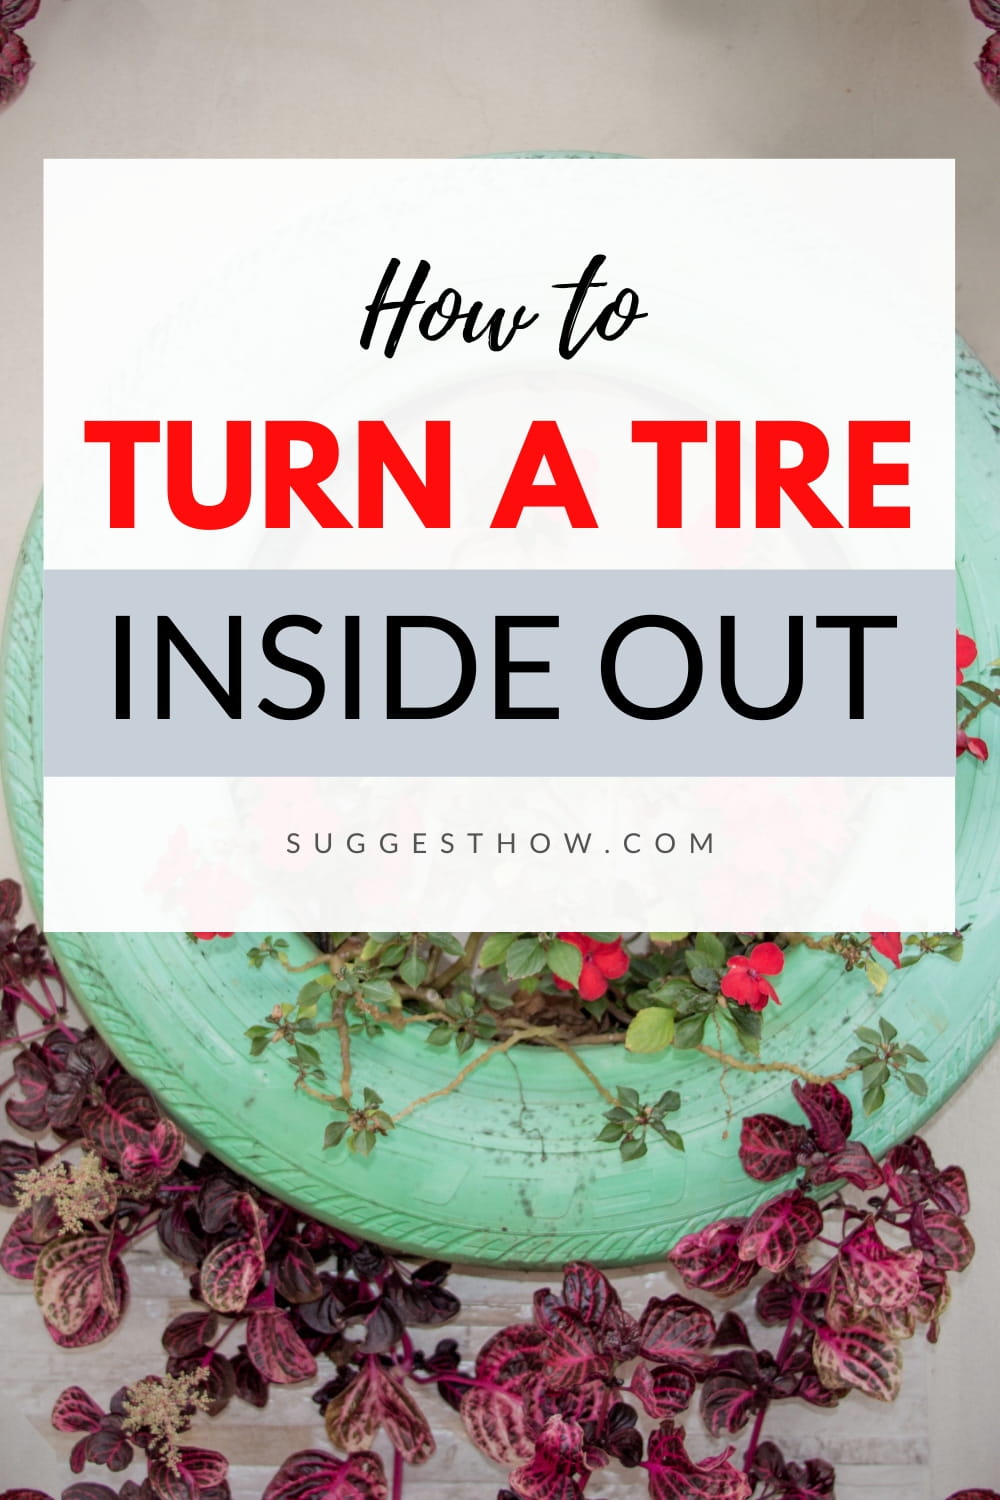 4 Steps To Turn a Tire Inside Out